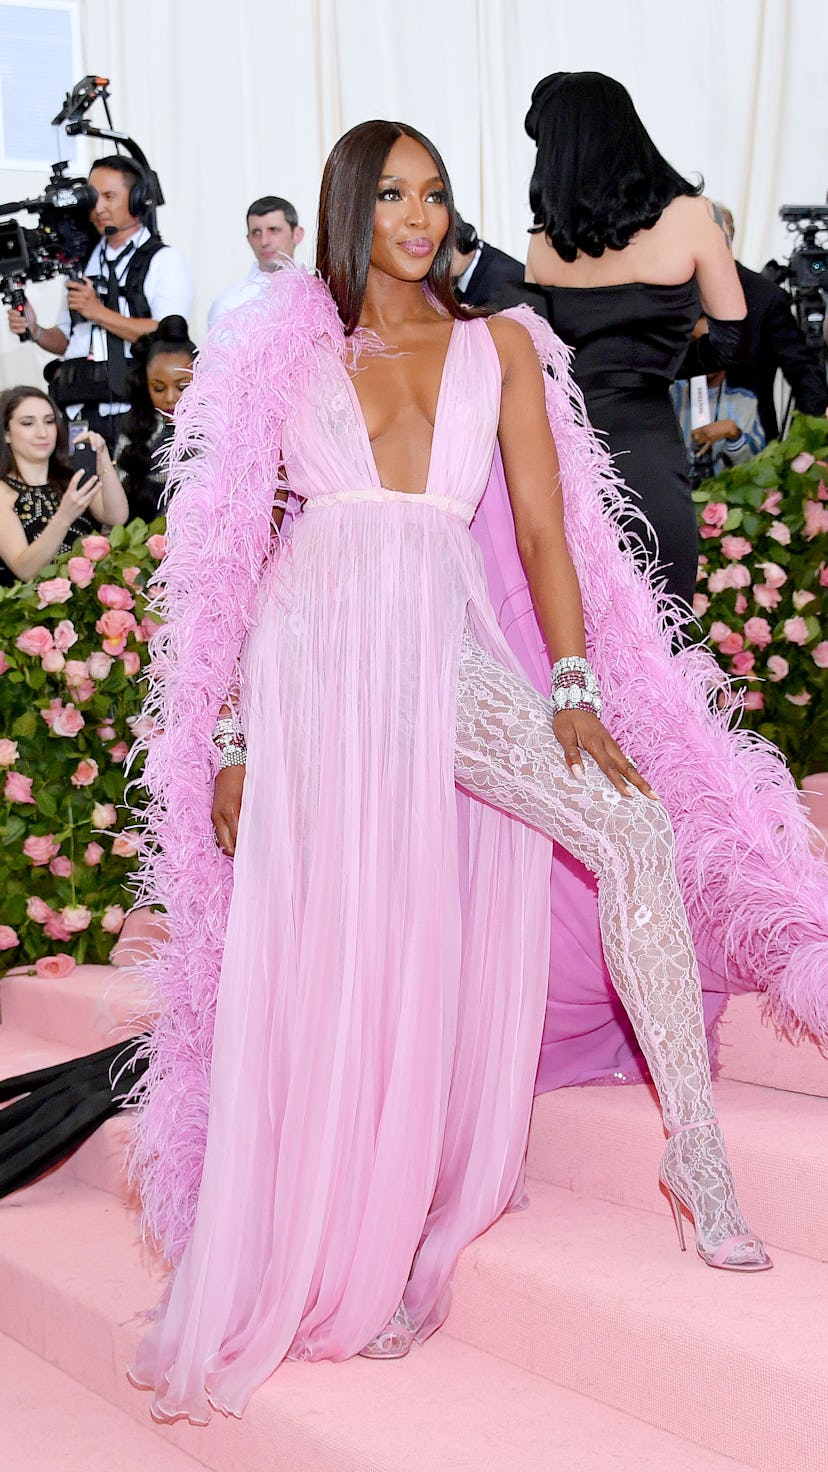 NEW YORK, NEW YORK - MAY 06: Naomi Campbell attends The 2019 Met Gala Celebrating Camp: Notes on Fas...